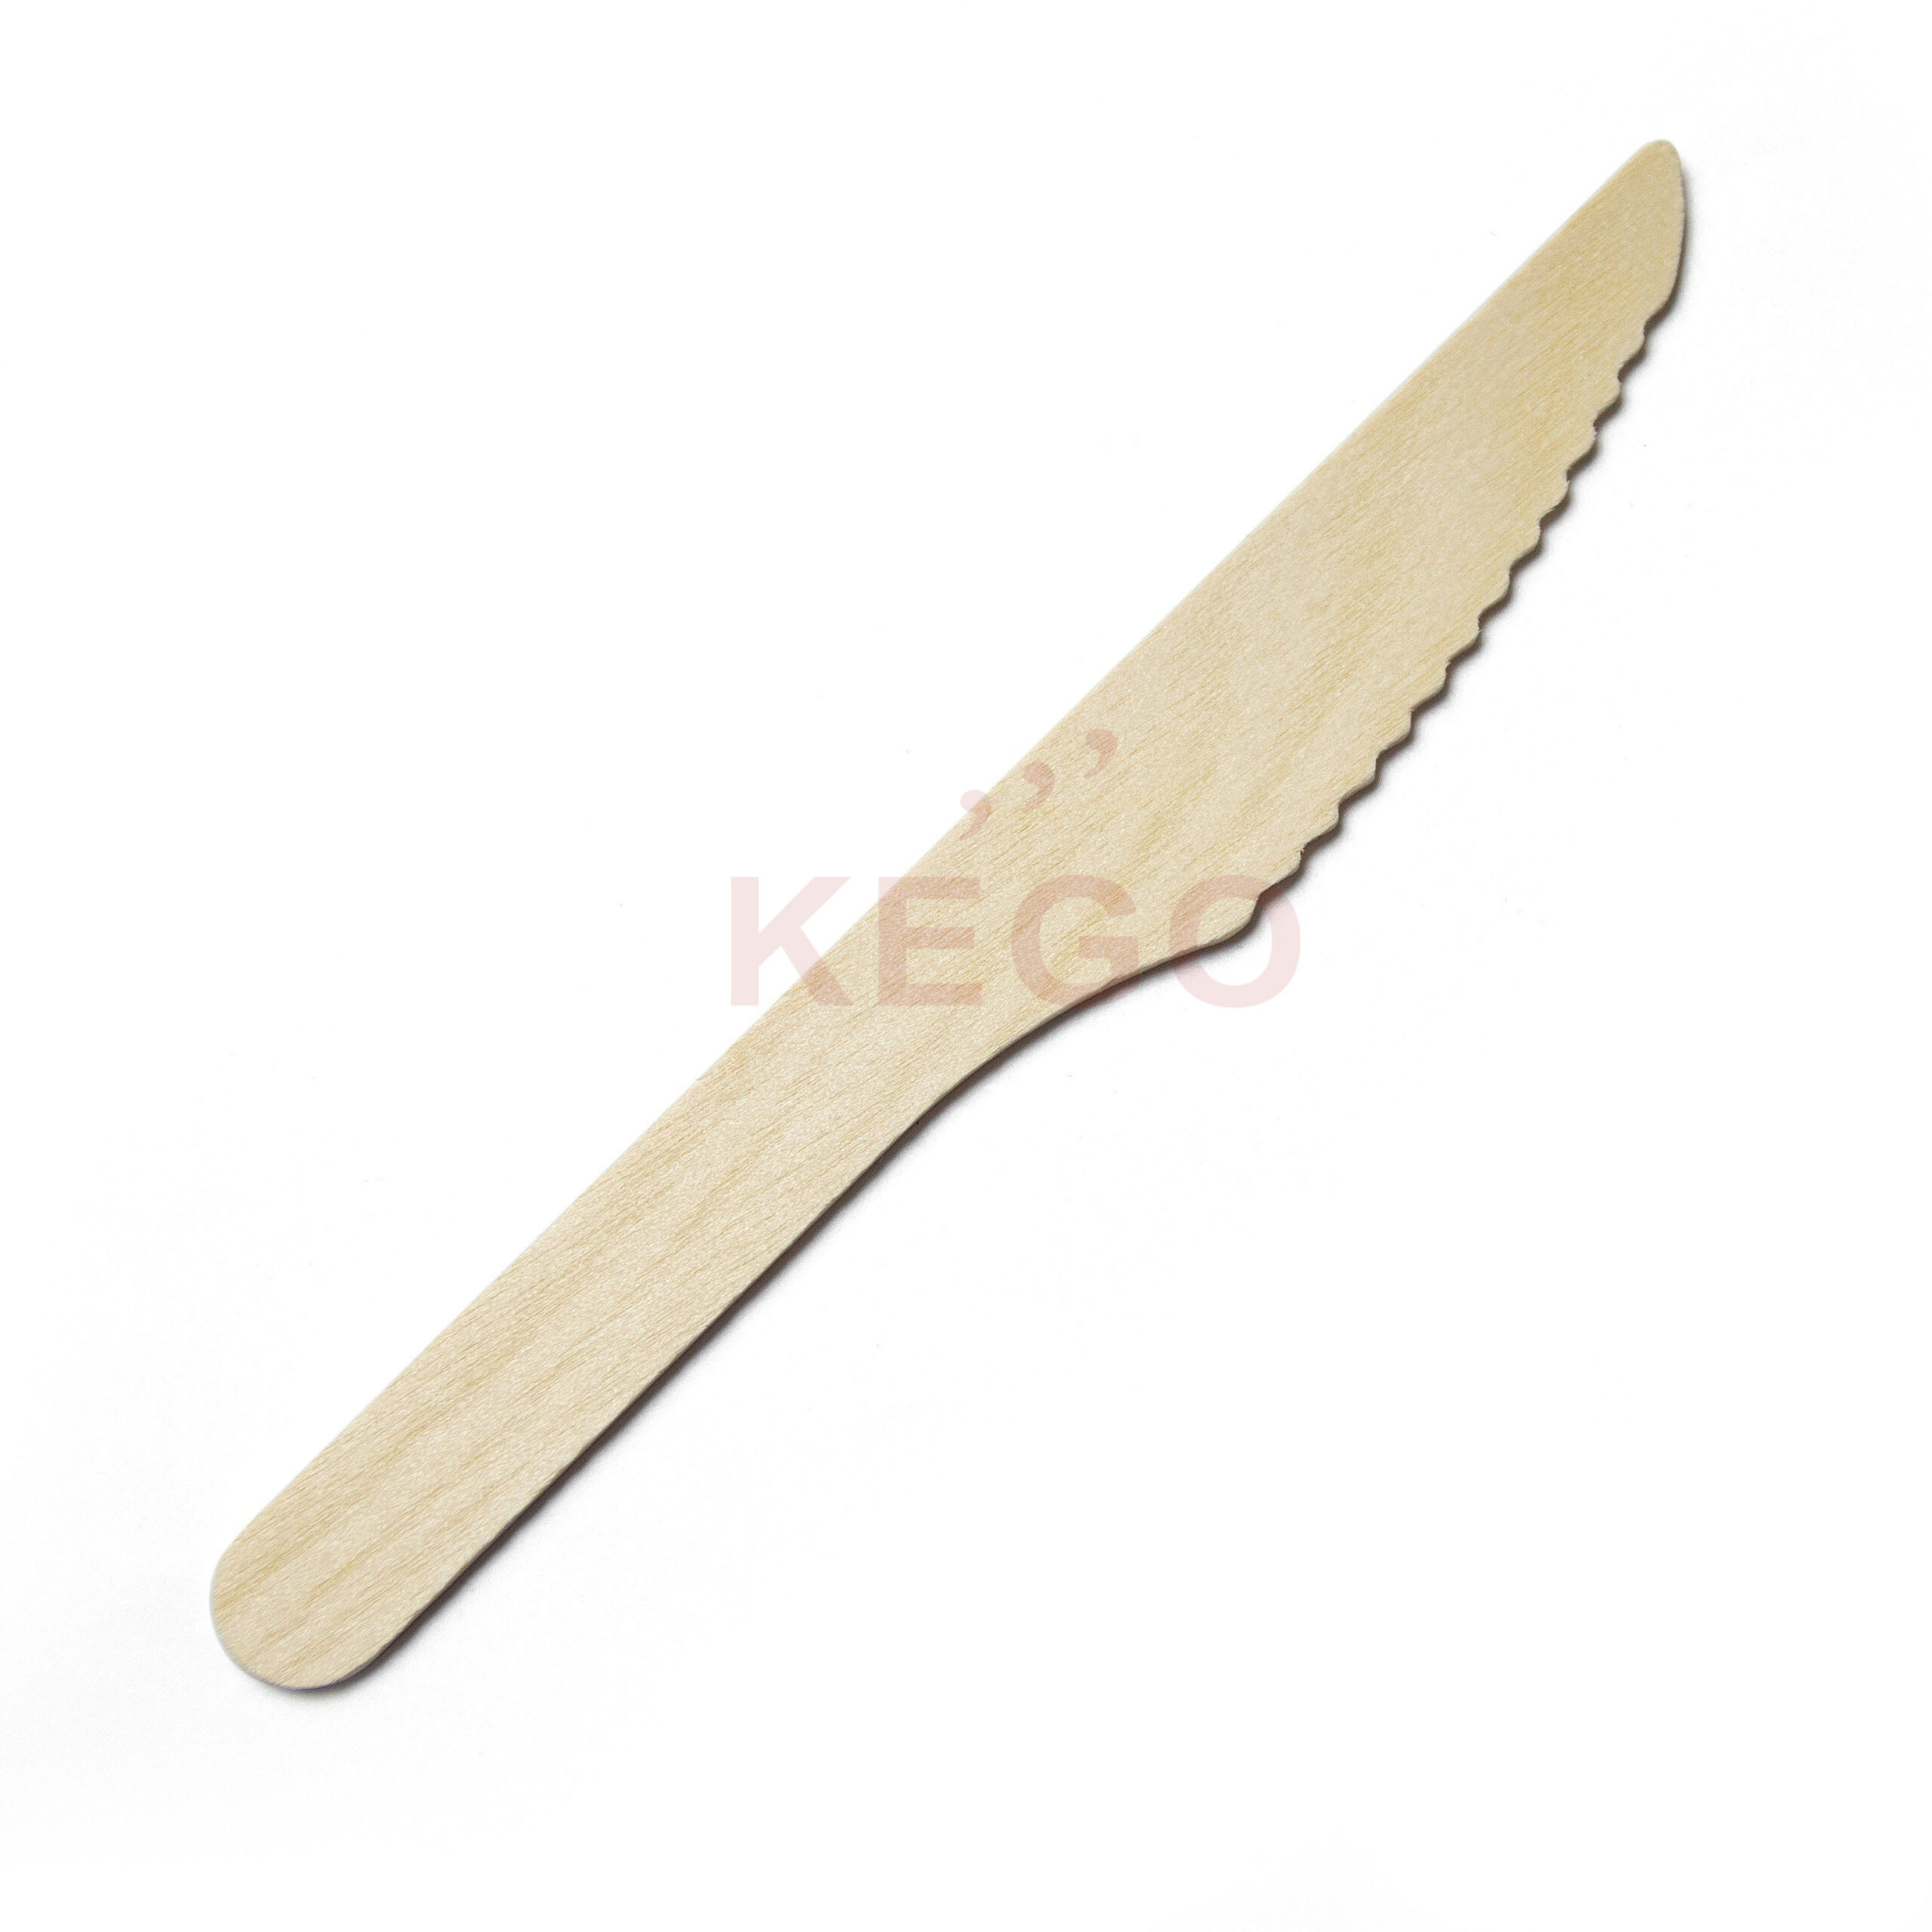 https://disposablewoodencutlery.com/wp-content/uploads/2015/09/Disposable-Wooden-Knife-165-2-1-scaled.jpg